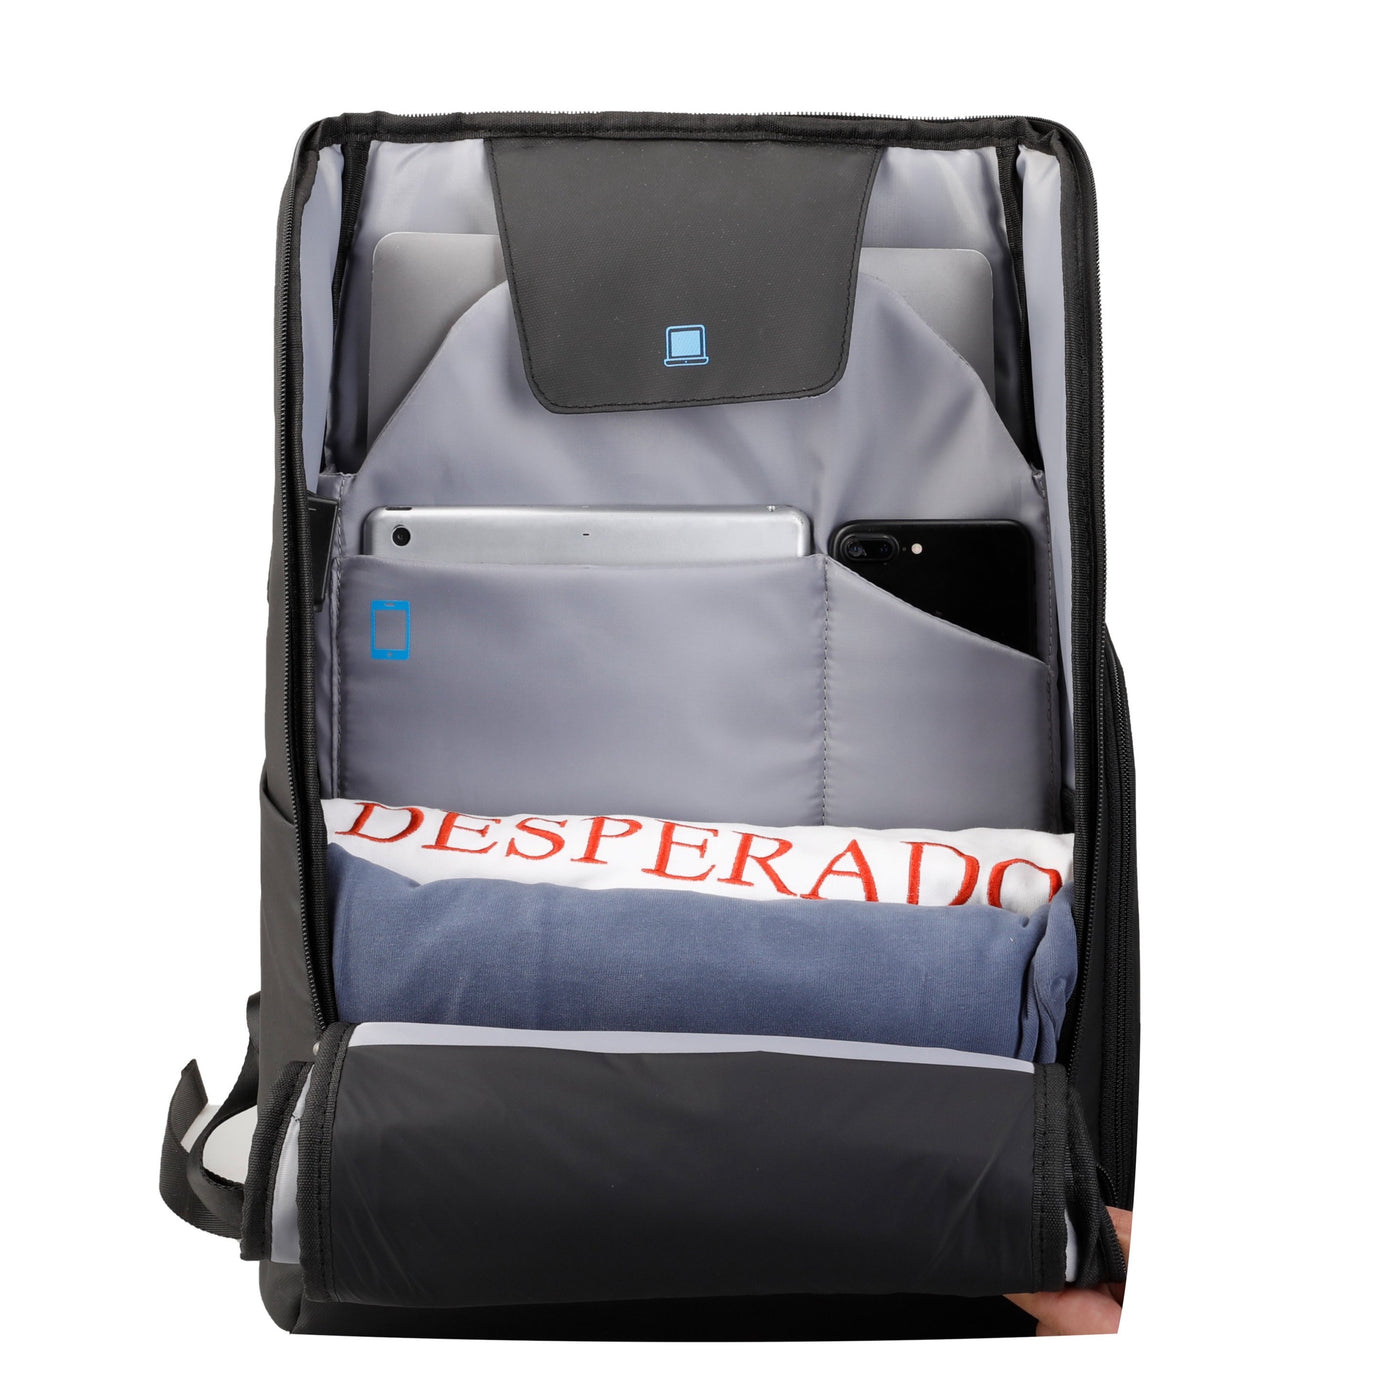 mark ryden black and dark grey usb and micro usb charging backpack with RFID blocking technology